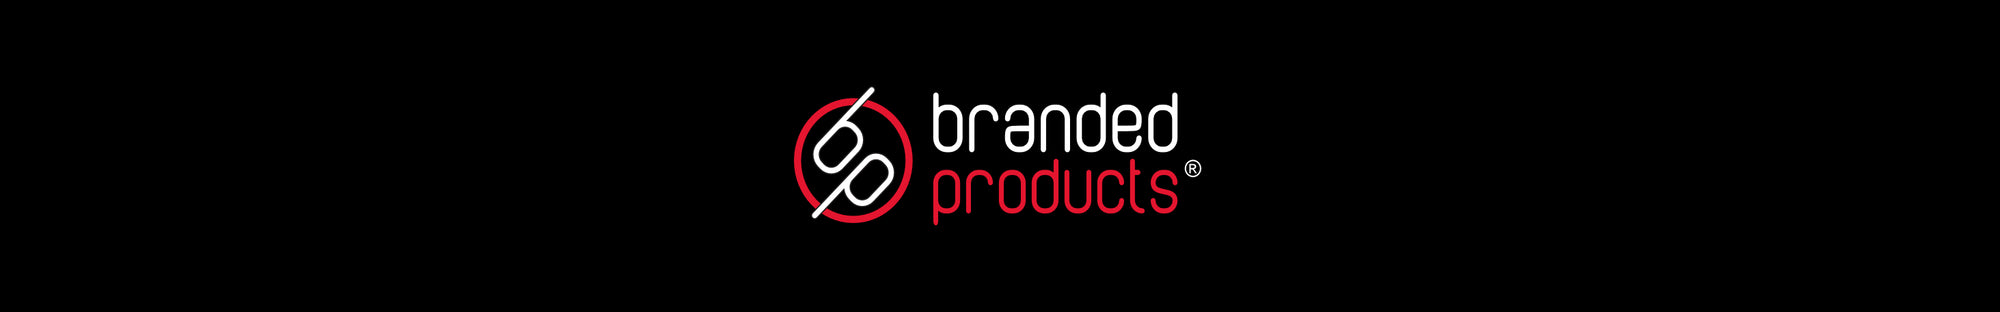 BRANDED PRODUCTS